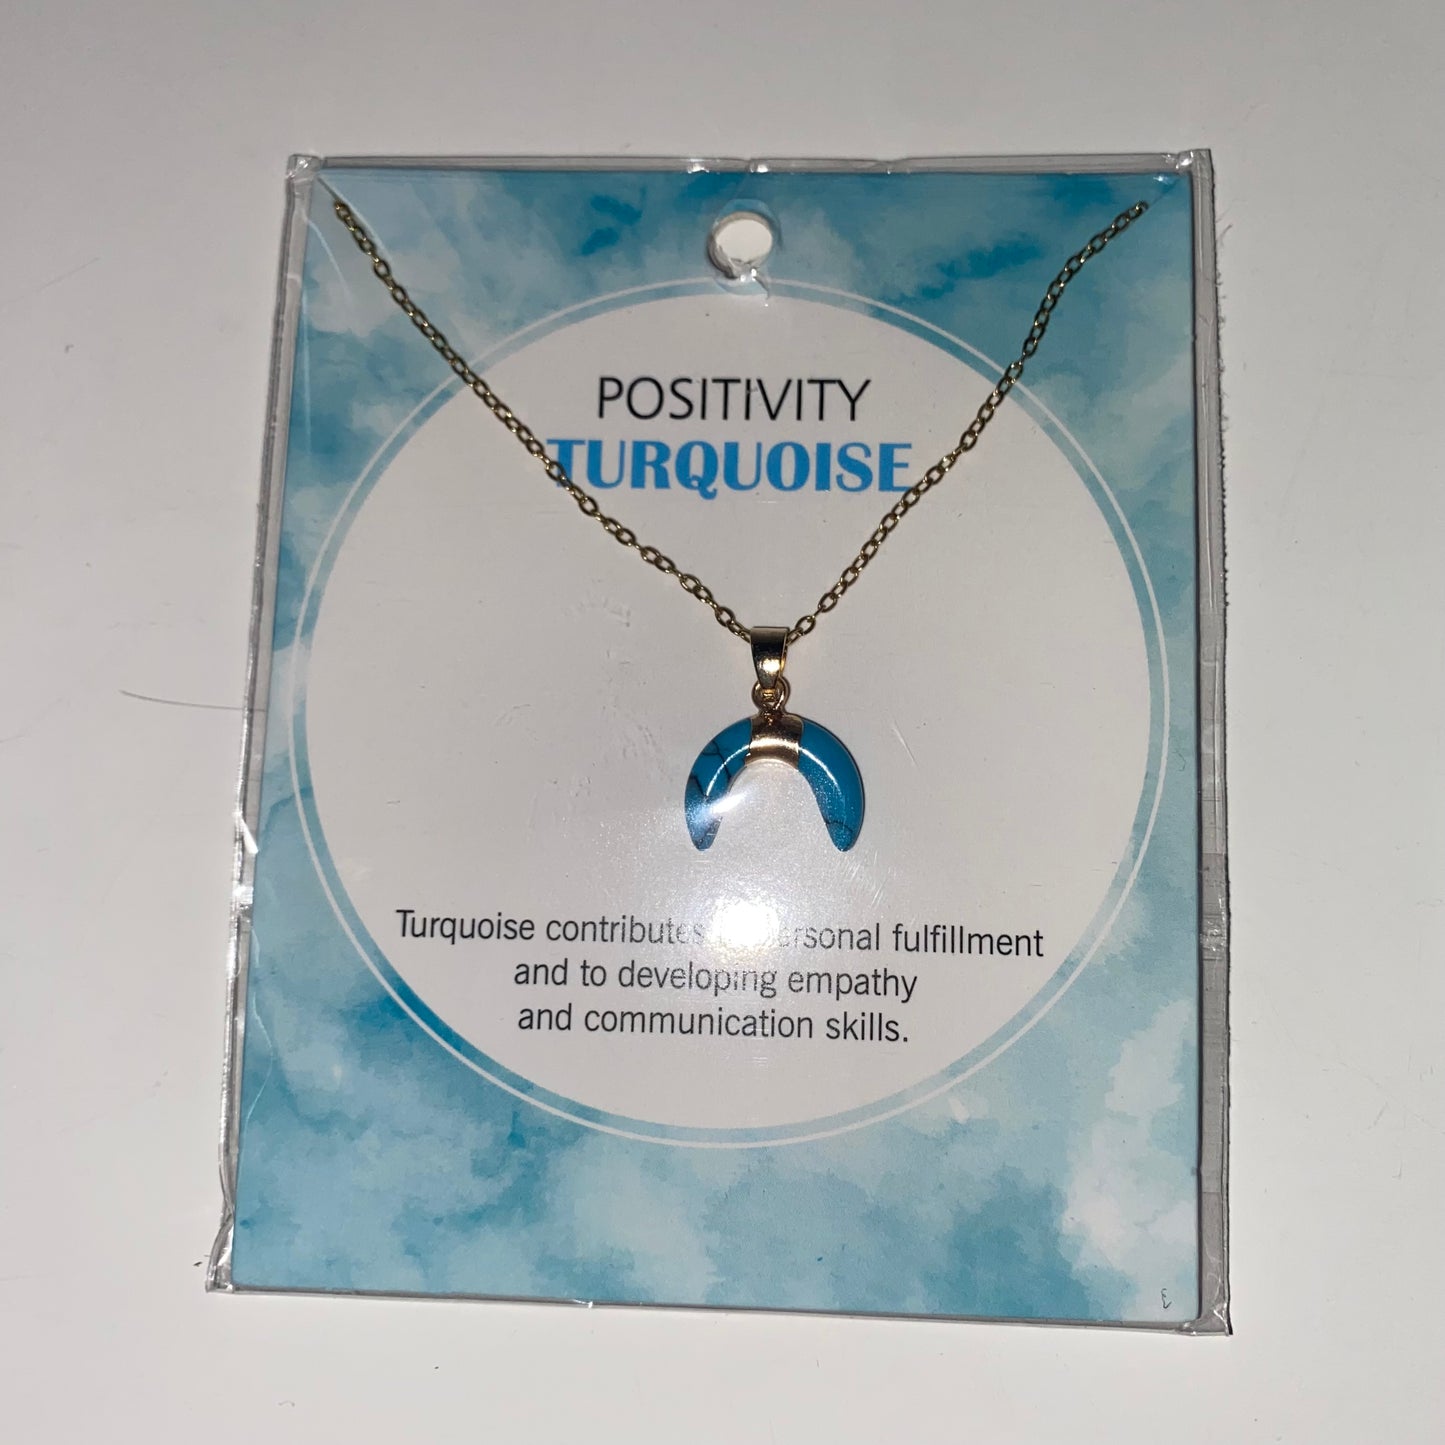 Positivity Turquoise Necklace